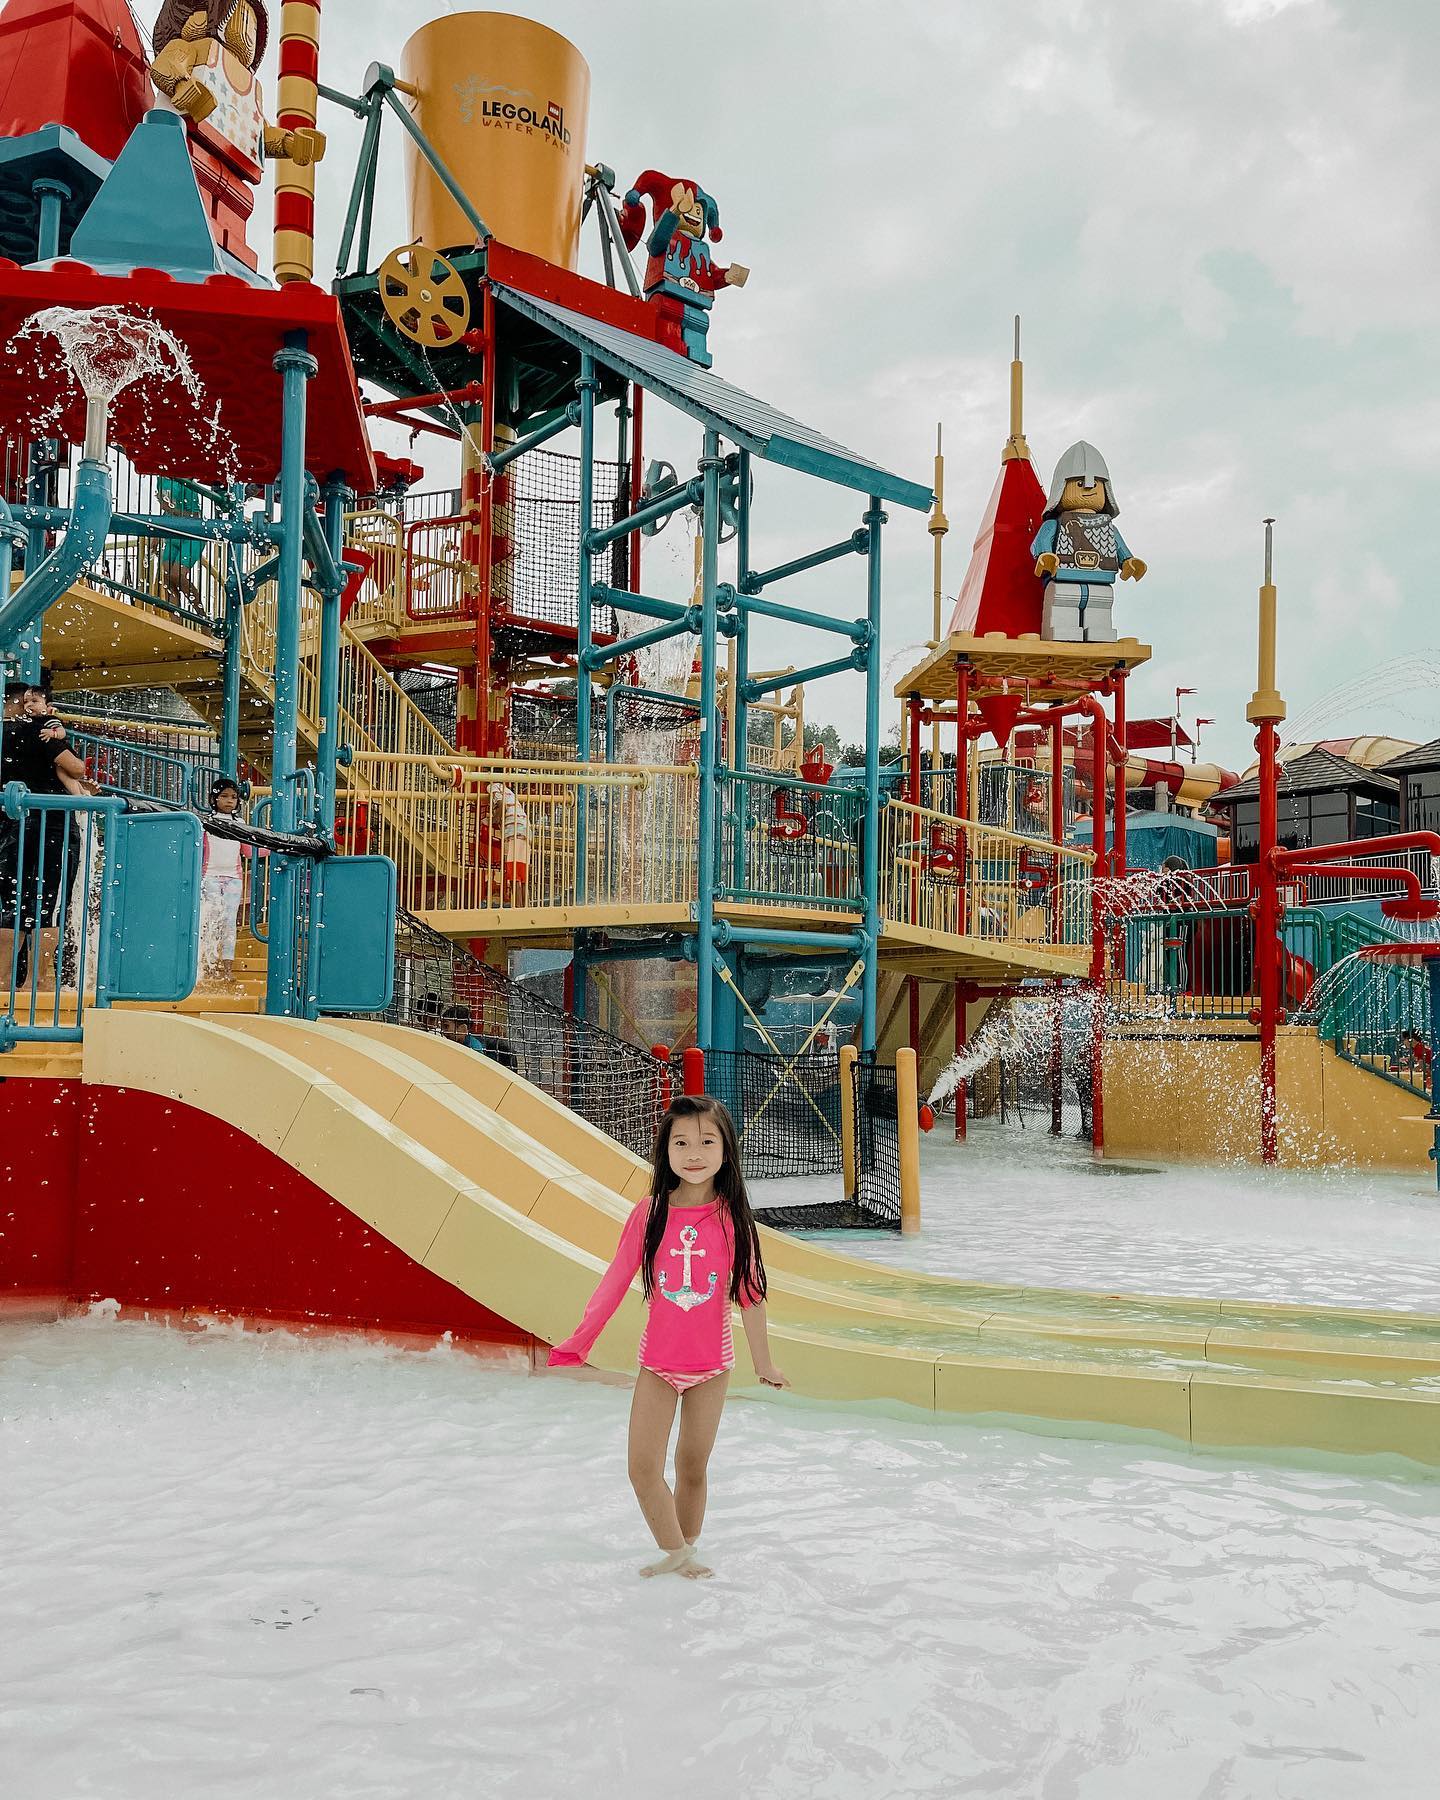 New & upcoming theme parks in Asia - LEGOLAND waterpark